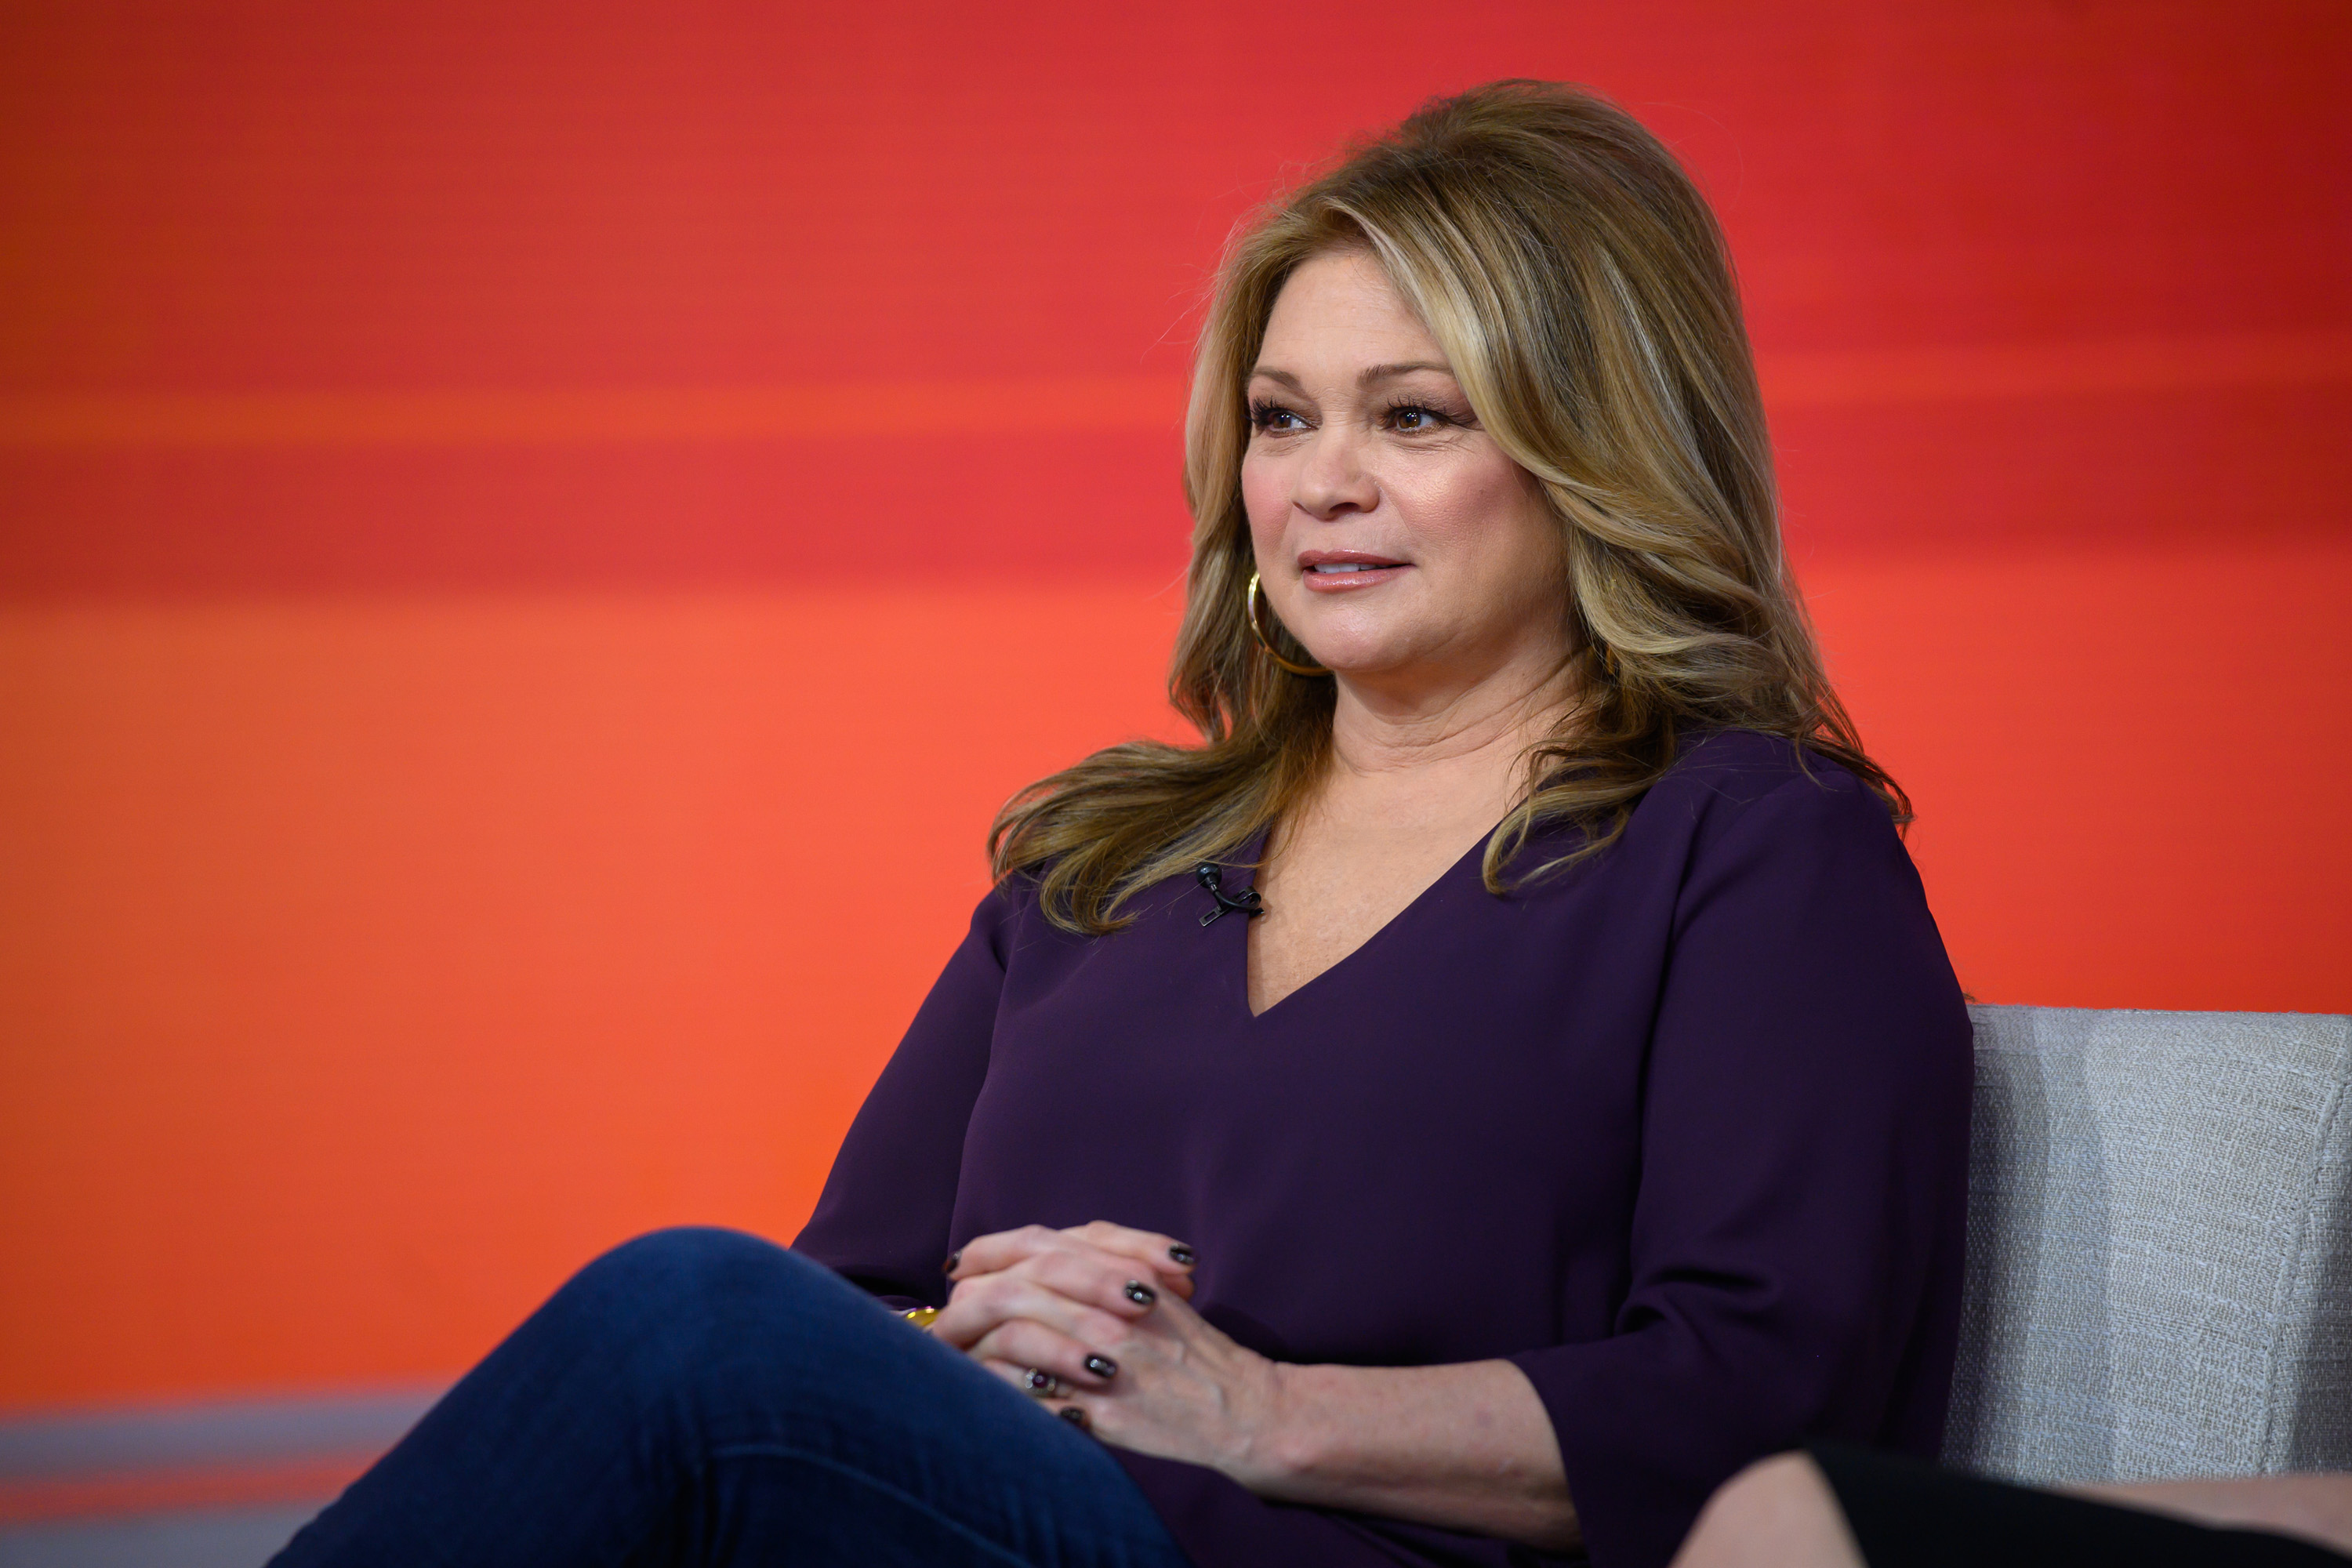 Actor Valerie Bertinelli on the set of 'Today' in 2020.